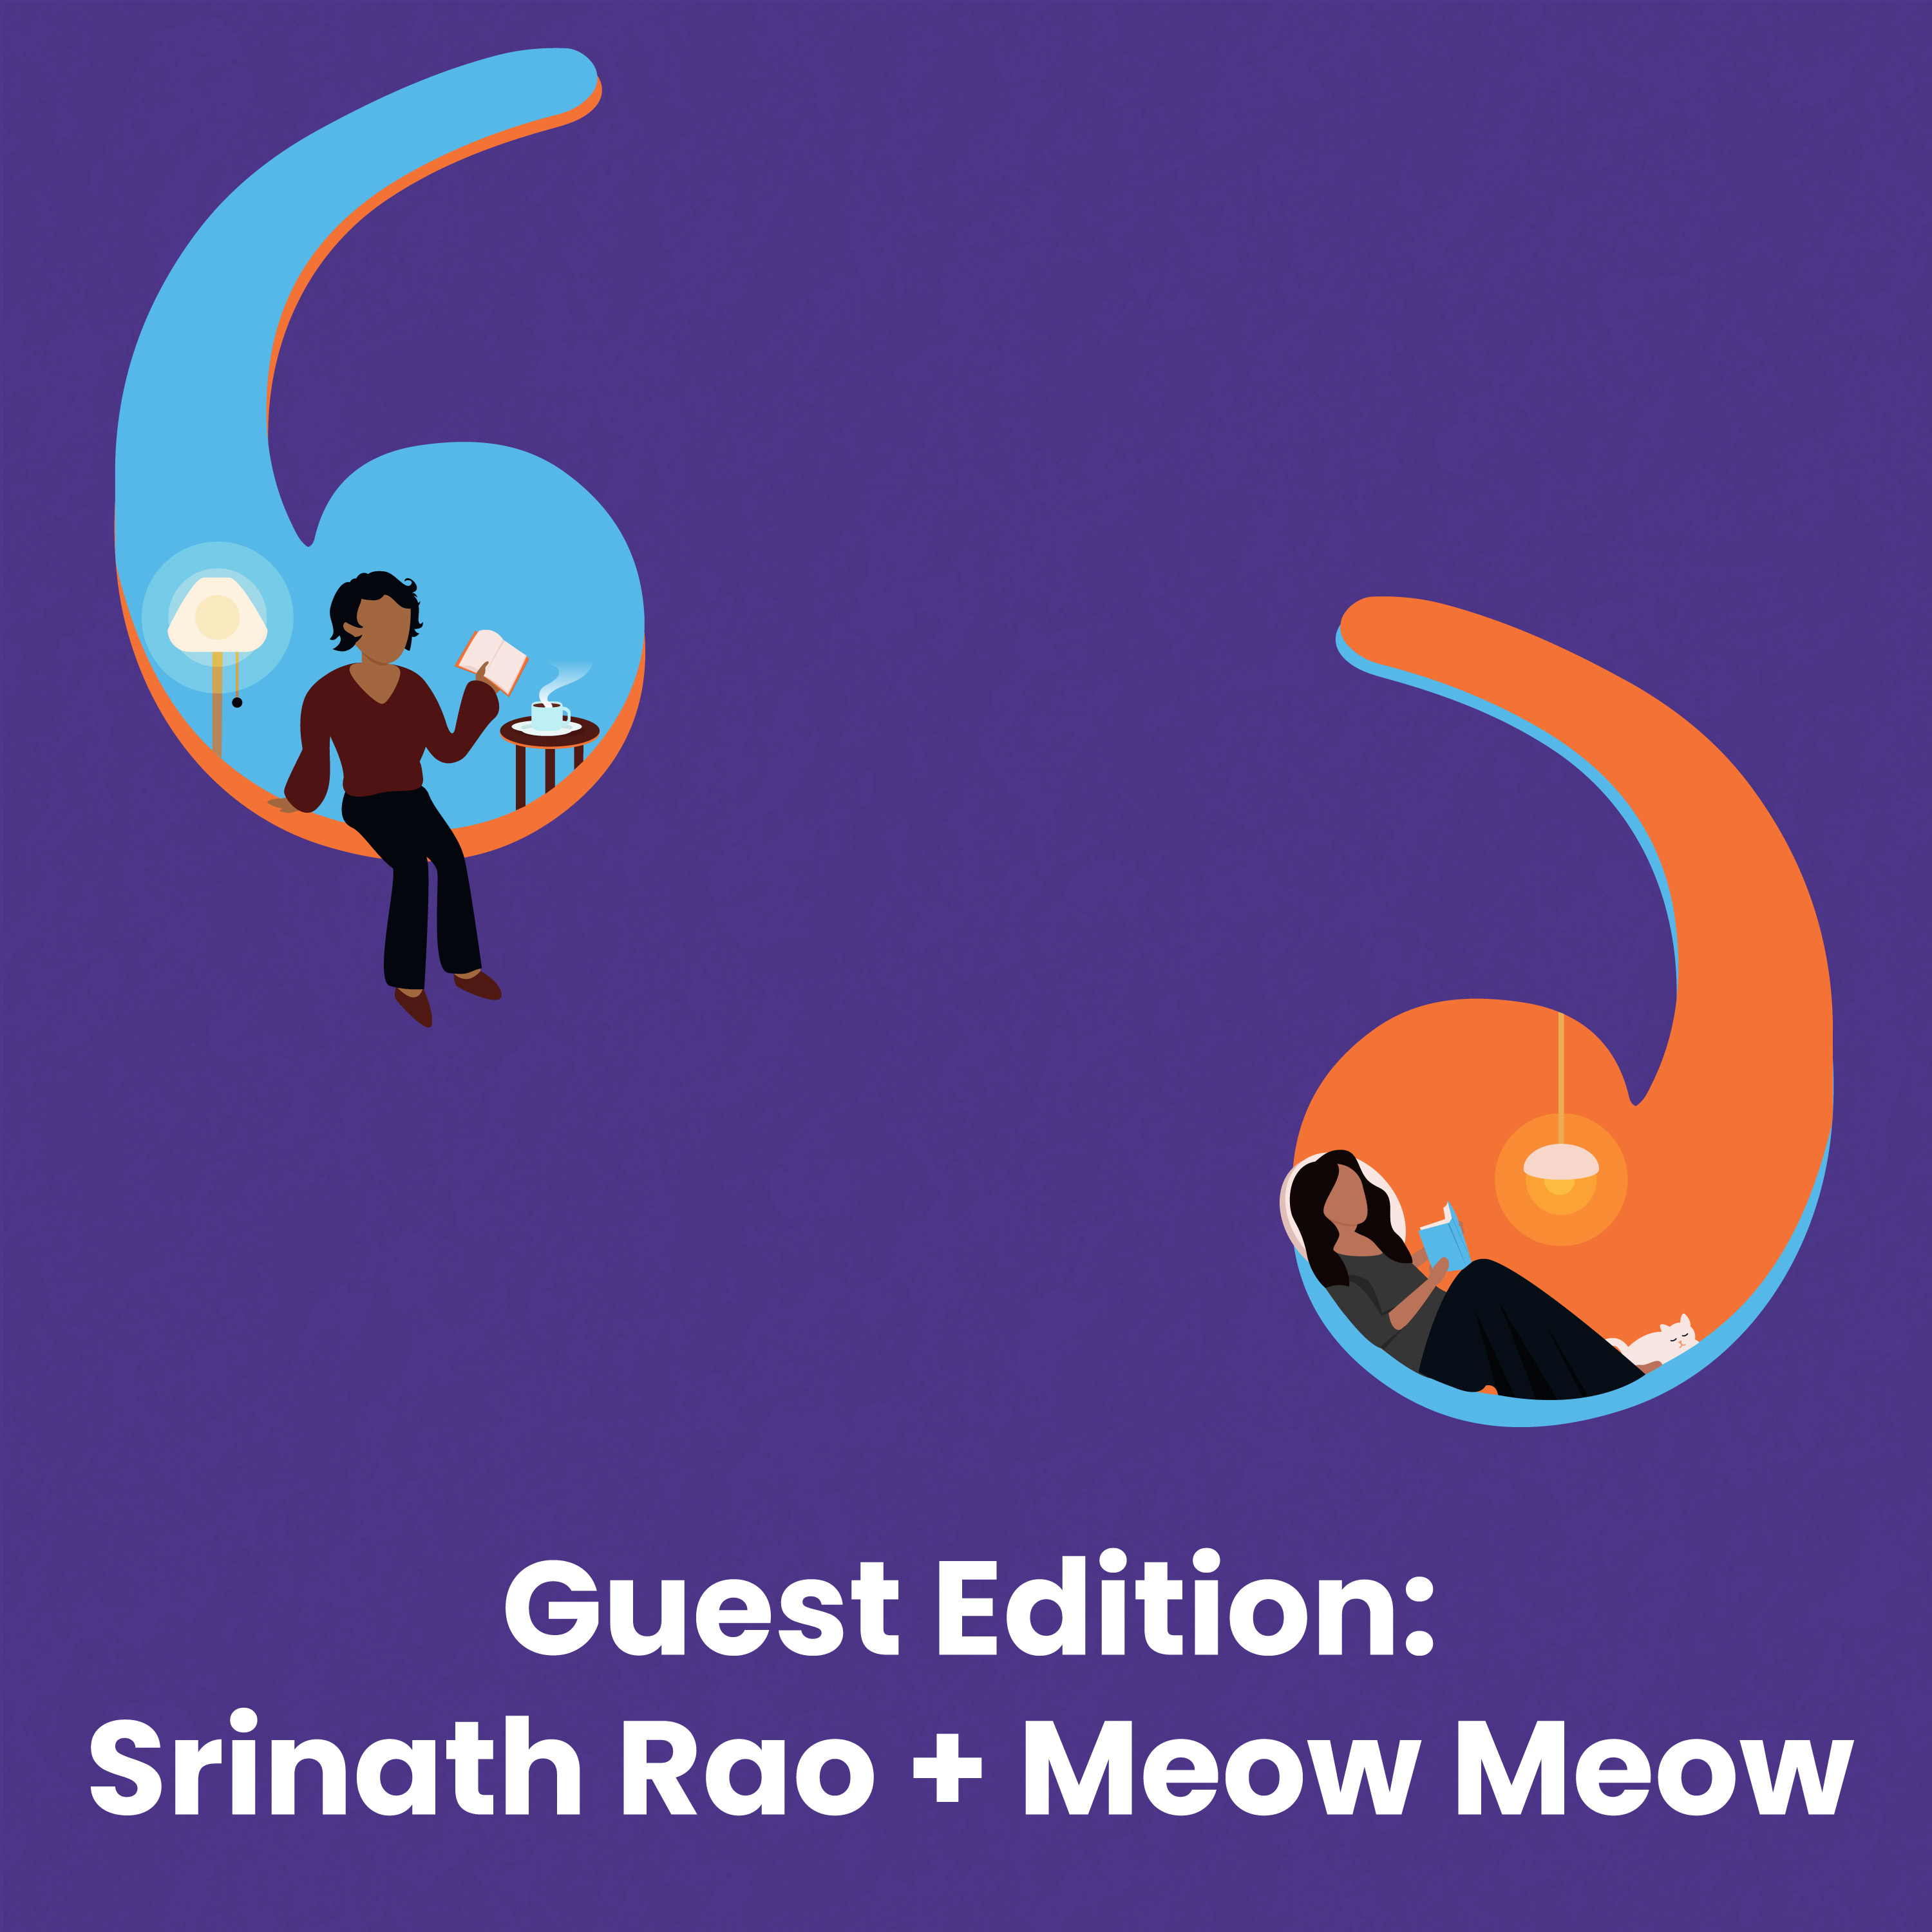 Guest Edition: Srinath Rao + Meow Meow